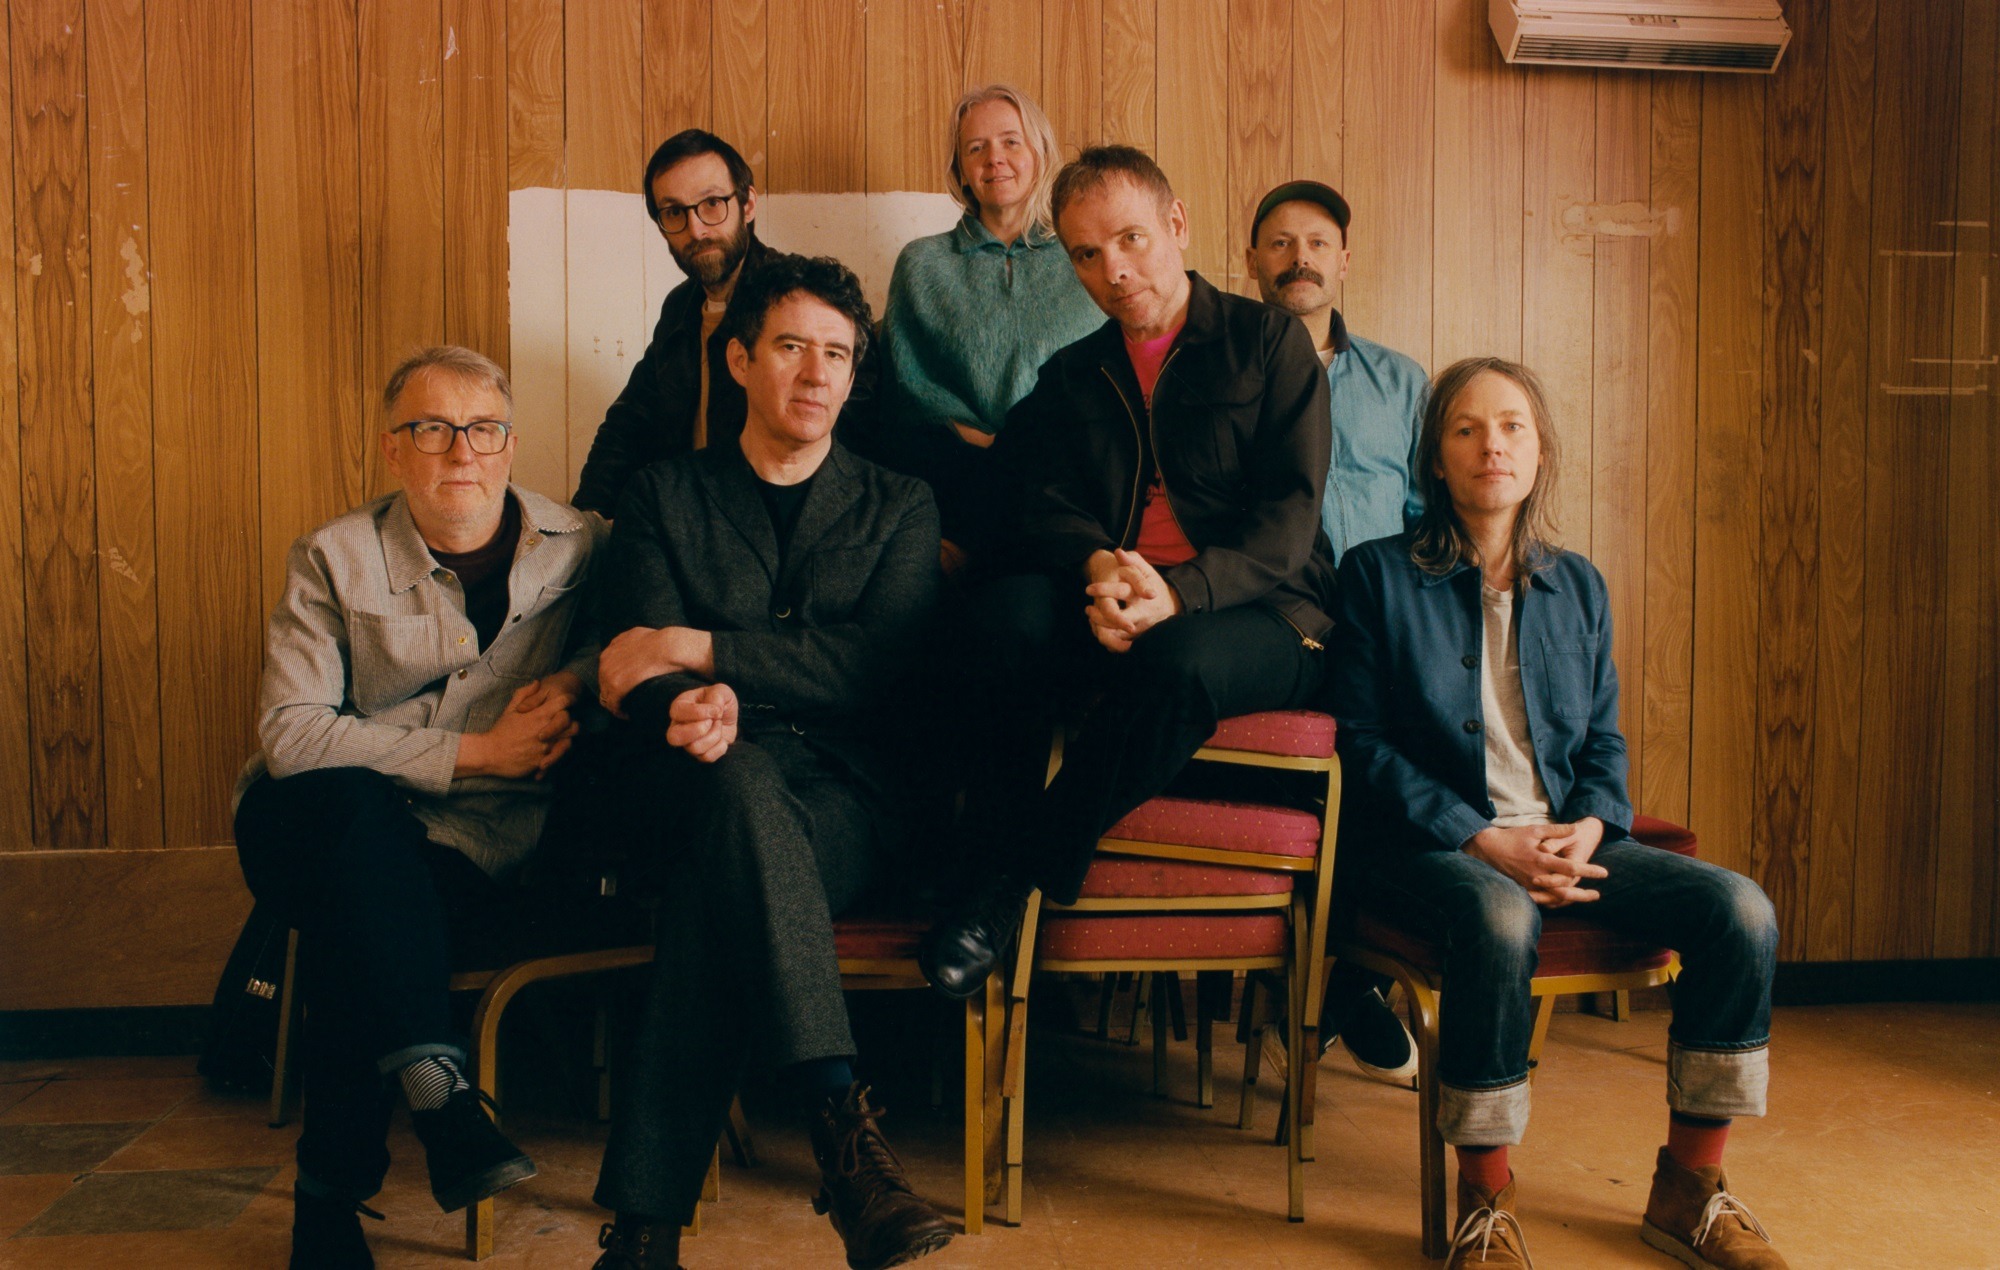 Belle And Sebastian talk new album ‘A Bit Of Previous’ and share lead single ‘Unnecessary Drama’